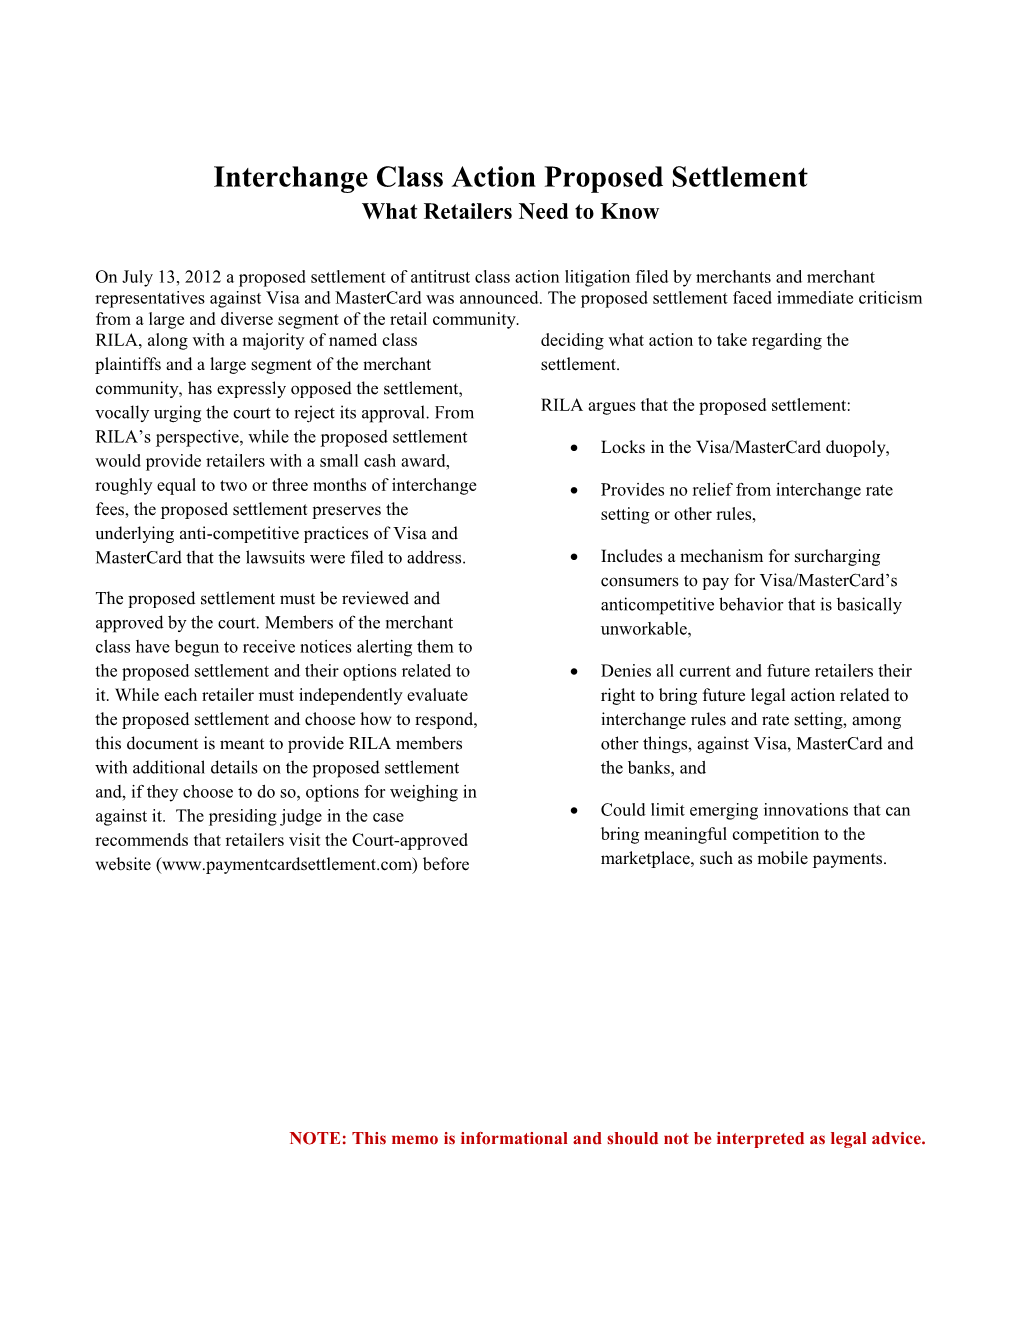 Interchange Class Action Proposed Settlement What Retailers Need to Know